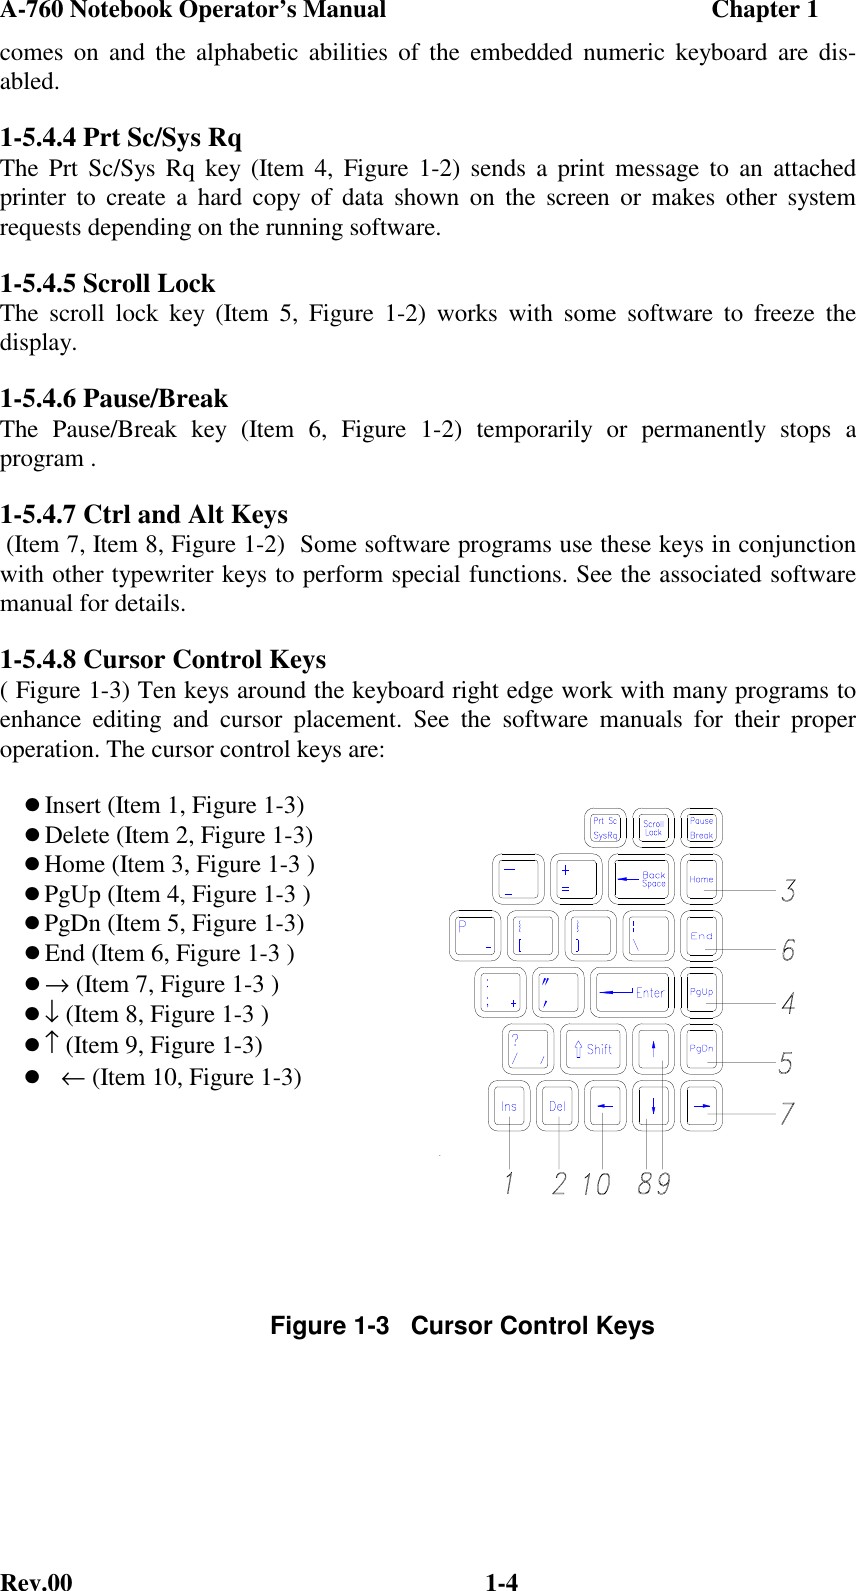 A-760 Notebook Operator’s Manual                                                    Chapter 1Rev.00 1-4comes on and the alphabetic abilities of the embedded numeric keyboard are dis-abled.1-5.4.4 Prt Sc/Sys RqThe Prt Sc/Sys Rq key (Item 4, Figure 1-2) sends a print message to an attachedprinter to create a hard copy of data shown on the screen or makes other systemrequests depending on the running software.1-5.4.5 Scroll LockThe scroll lock key (Item 5, Figure 1-2) works with some software to freeze thedisplay.1-5.4.6 Pause/BreakThe Pause/Break key (Item 6, Figure 1-2) temporarily or permanently stops aprogram .1-5.4.7 Ctrl and Alt Keys (Item 7, Item 8, Figure 1-2)  Some software programs use these keys in conjunctionwith other typewriter keys to perform special functions. See the associated softwaremanual for details.1-5.4.8 Cursor Control Keys( Figure 1-3) Ten keys around the keyboard right edge work with many programs toenhance editing and cursor placement. See the software manuals for their properoperation. The cursor control keys are:Insert (Item 1, Figure 1-3)Delete (Item 2, Figure 1-3)Home (Item 3, Figure 1-3 )PgUp (Item 4, Figure 1-3 )PgDn (Item 5, Figure 1-3)End (Item 6, Figure 1-3 )→ (Item 7, Figure 1-3 )↓ (Item 8, Figure 1-3 )↑ (Item 9, Figure 1-3) ← (Item 10, Figure 1-3)Figure 1-3   Cursor Control Keys